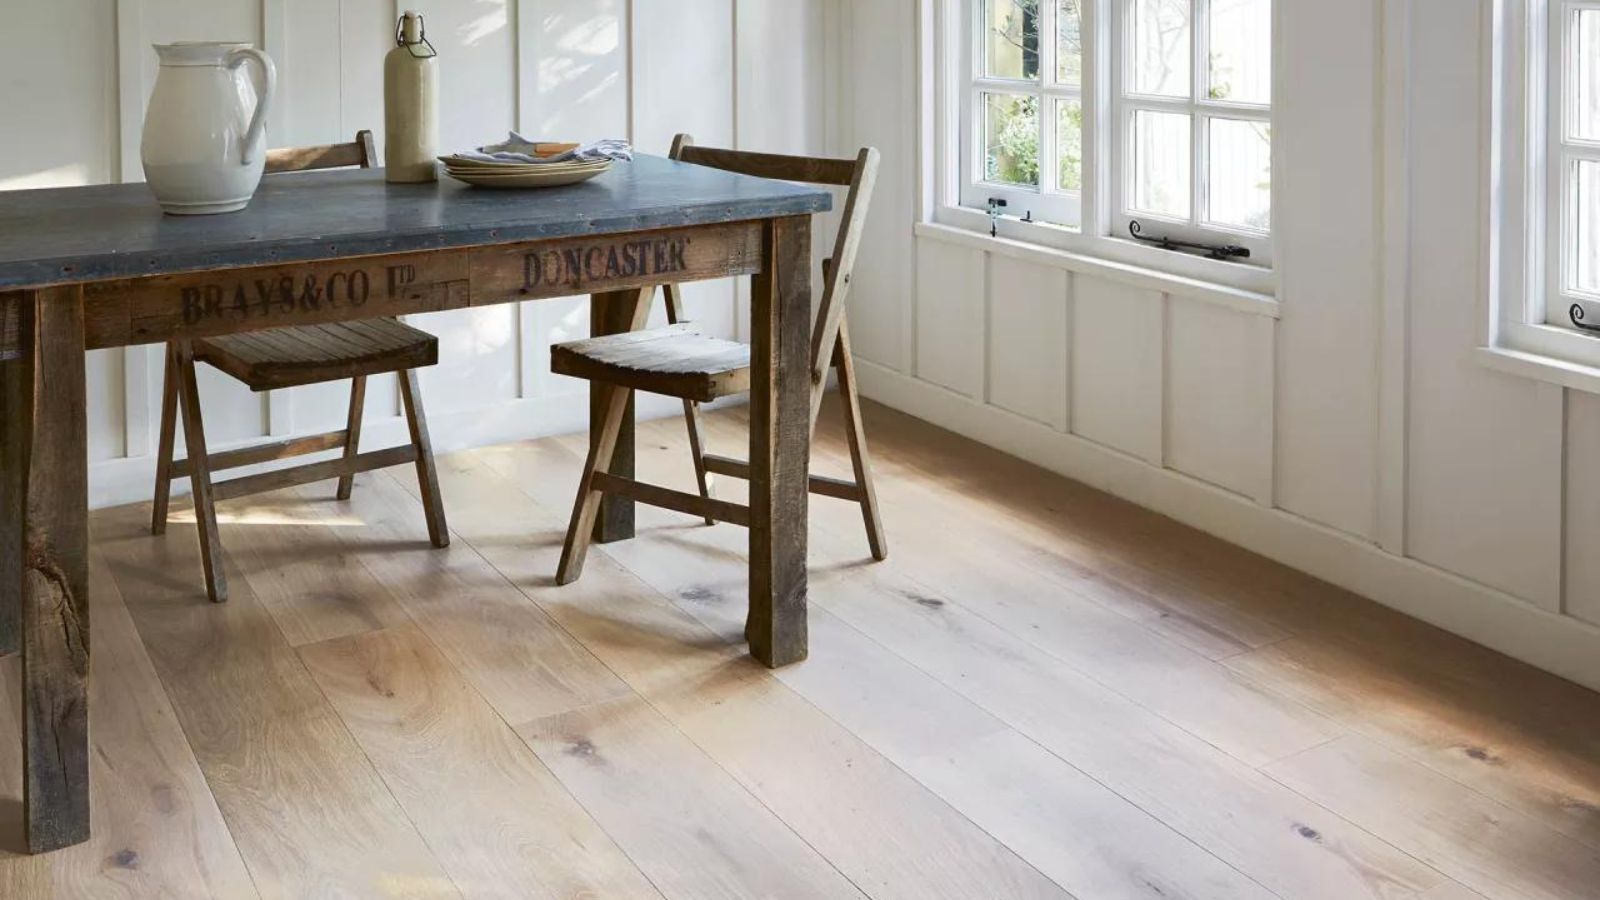 How to stop furniture sliding on hardwood floors: 4 ways to stop scratches